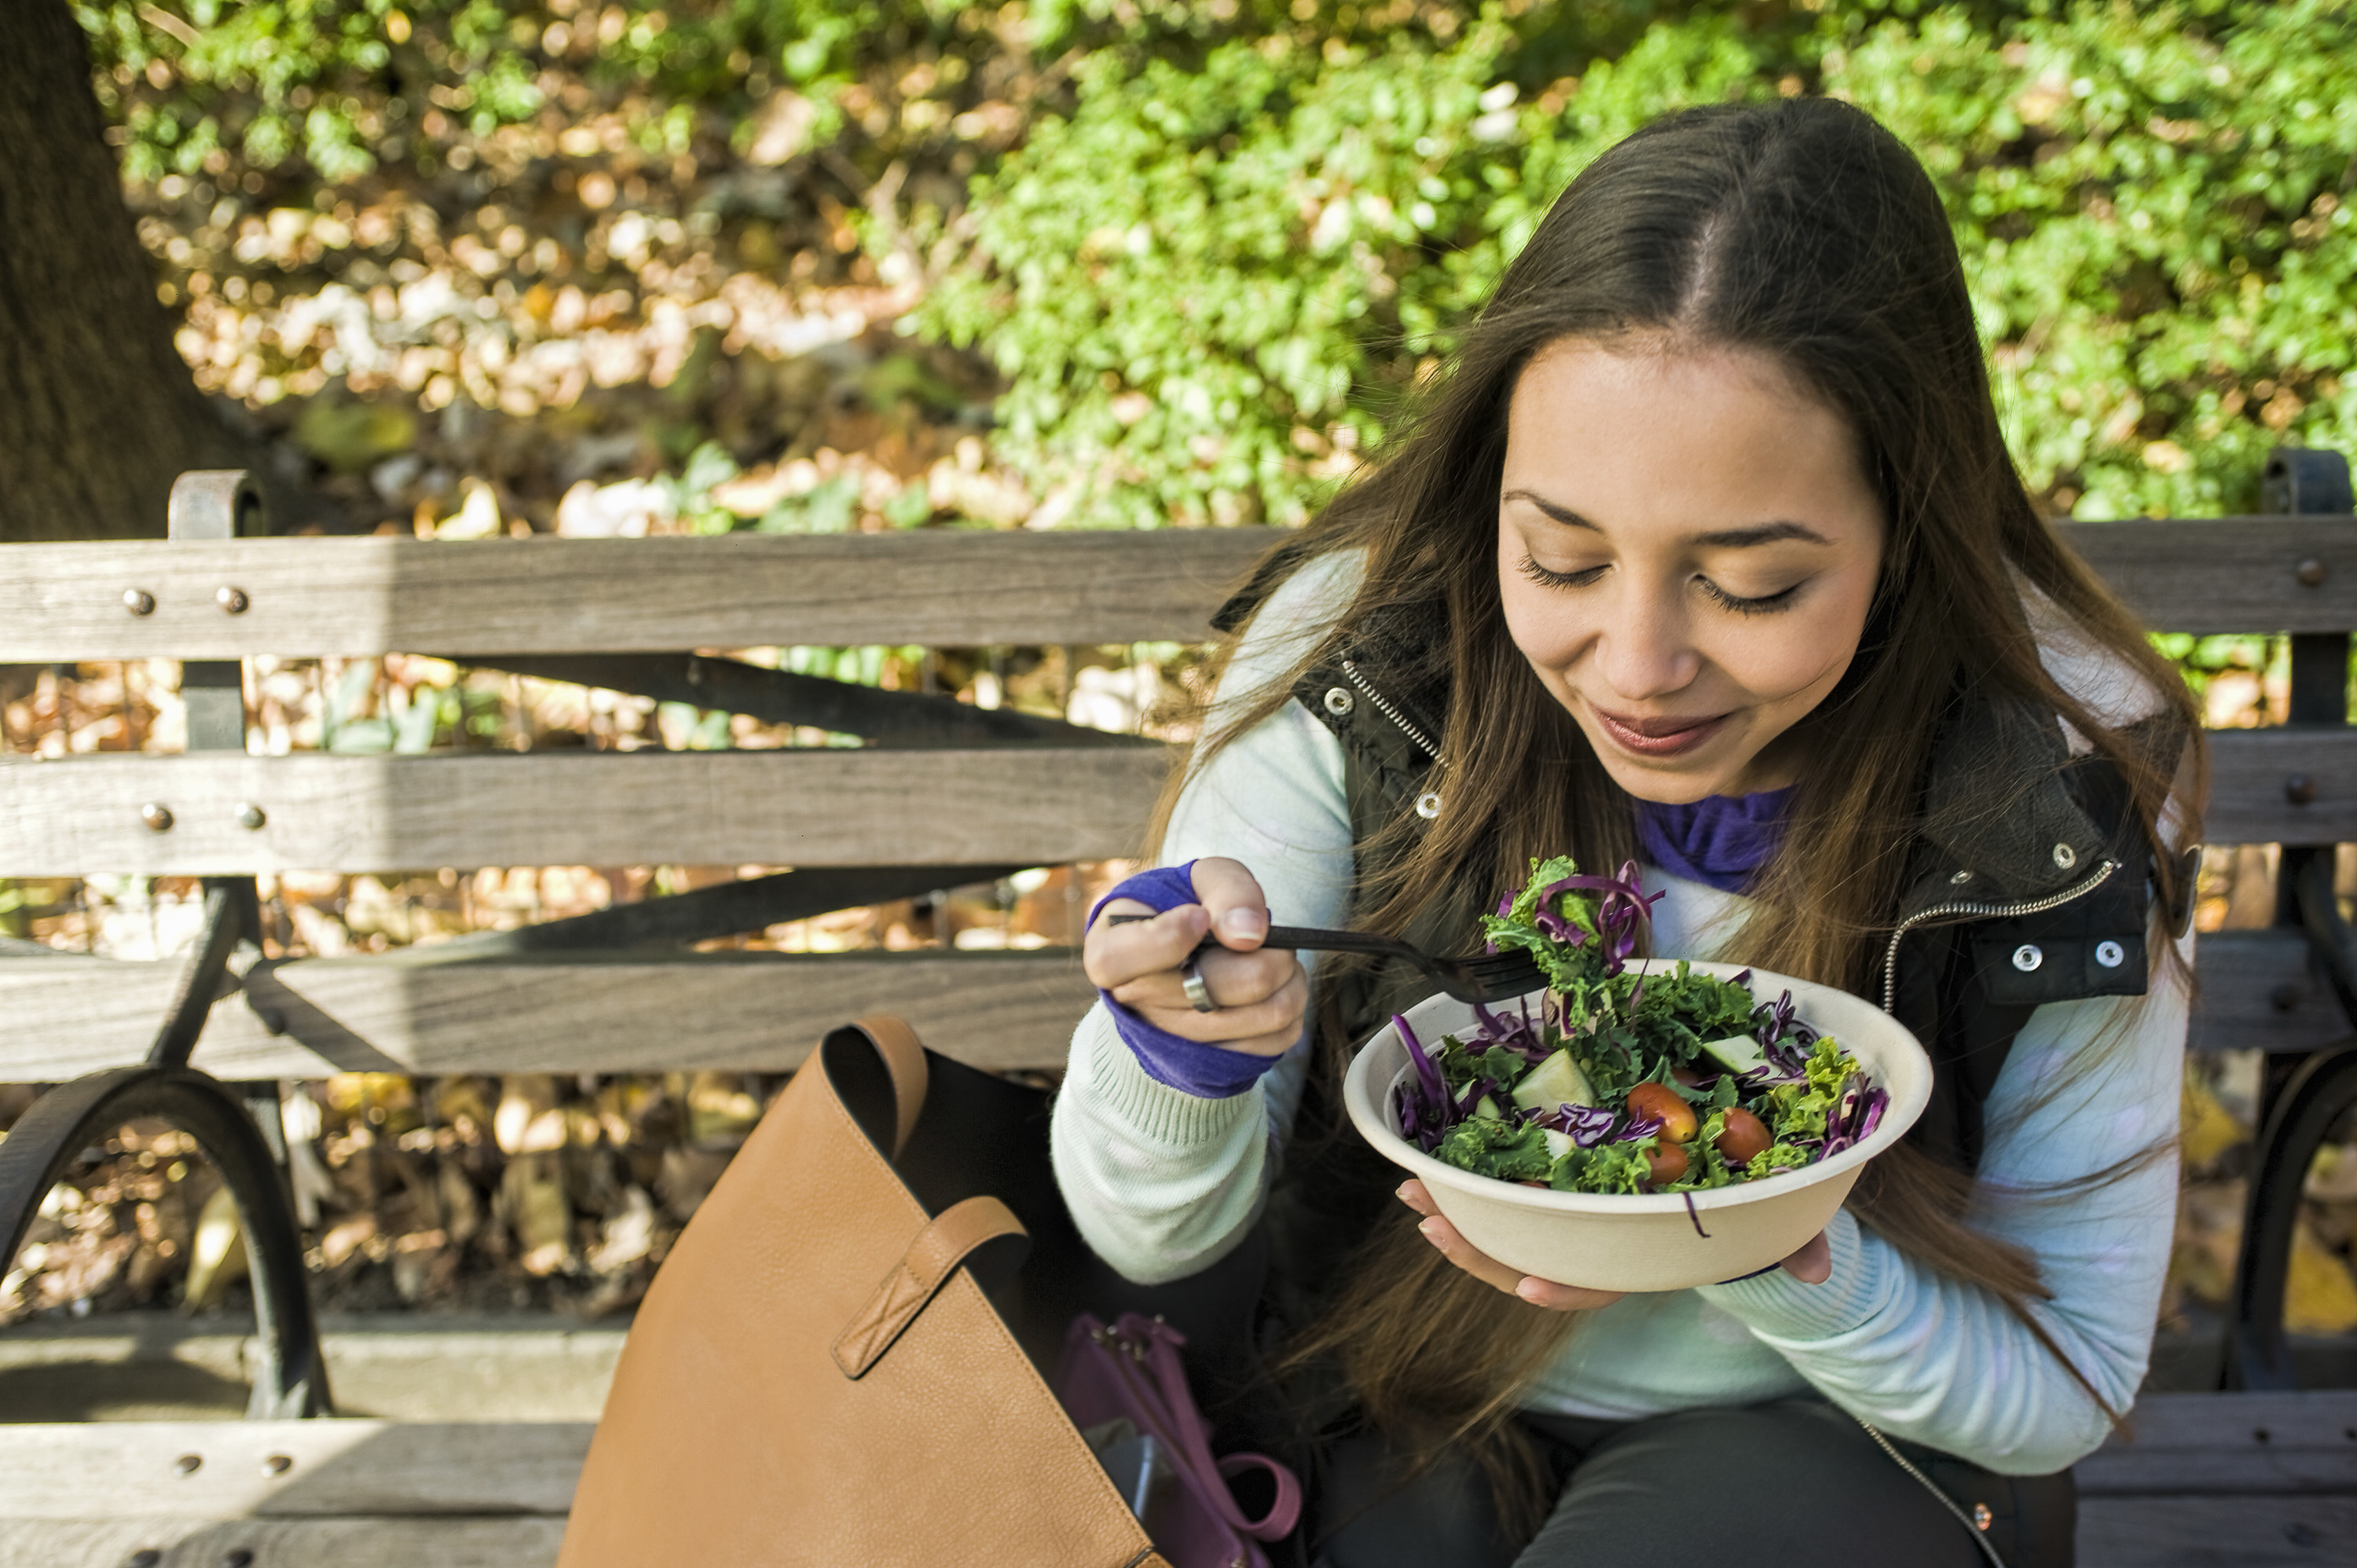 A woman eats a salad while sitting on a park bench